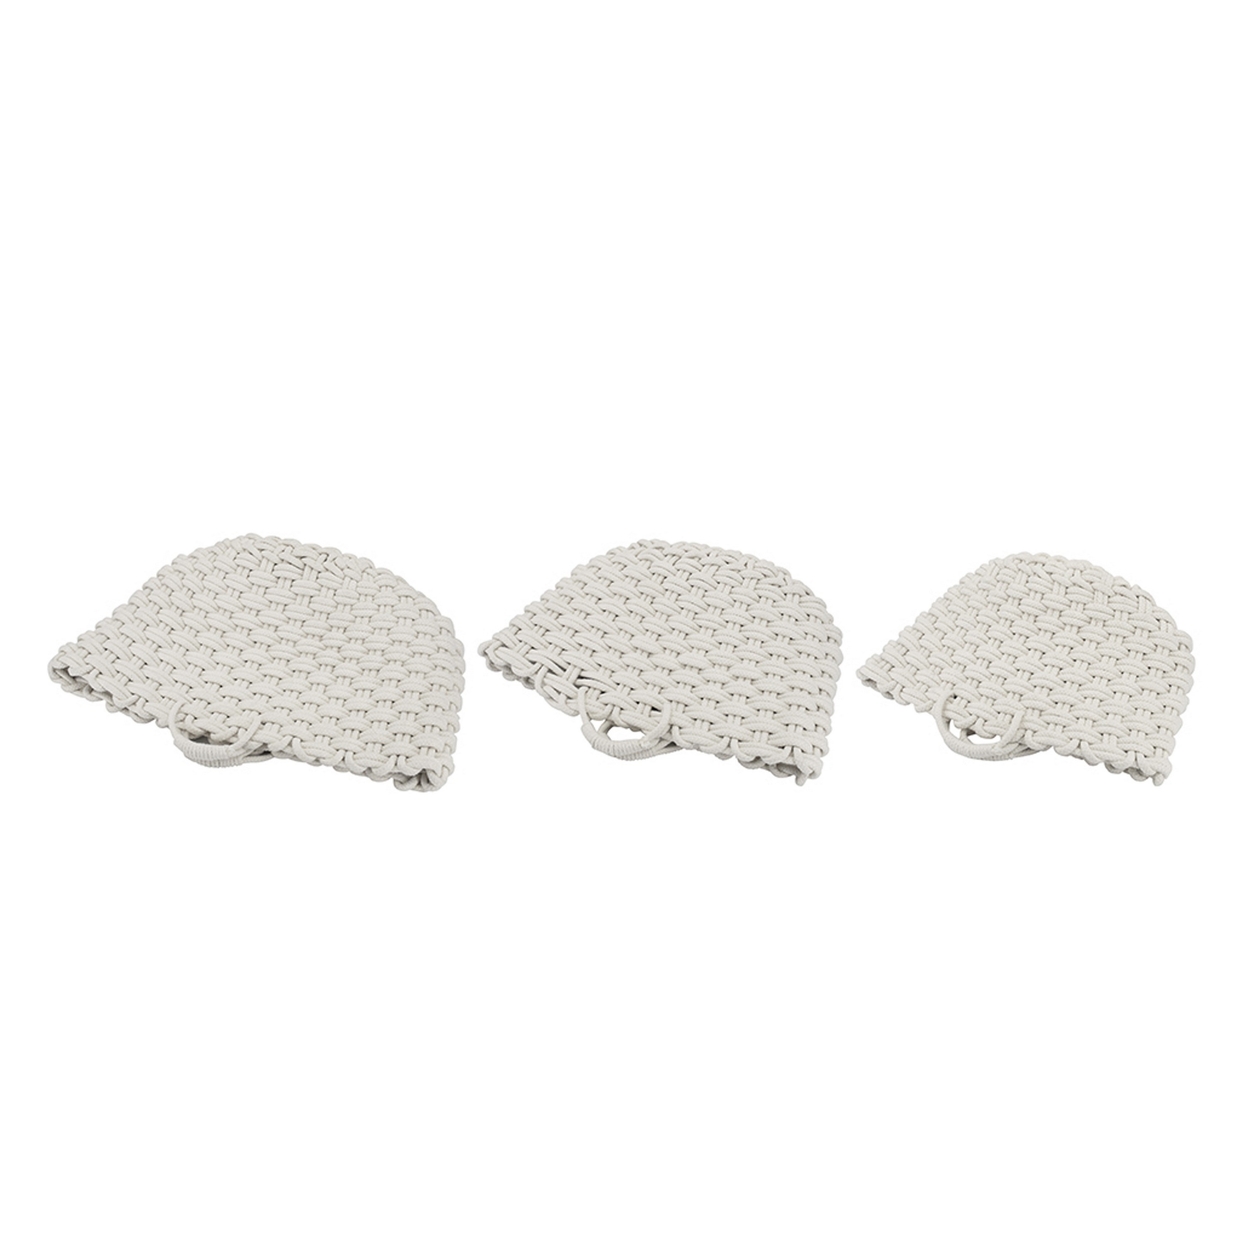 Set Of 3 Baskets, Woven Rope Design, Cotton And Polyester Fabric, White- Saltoro Sherpi